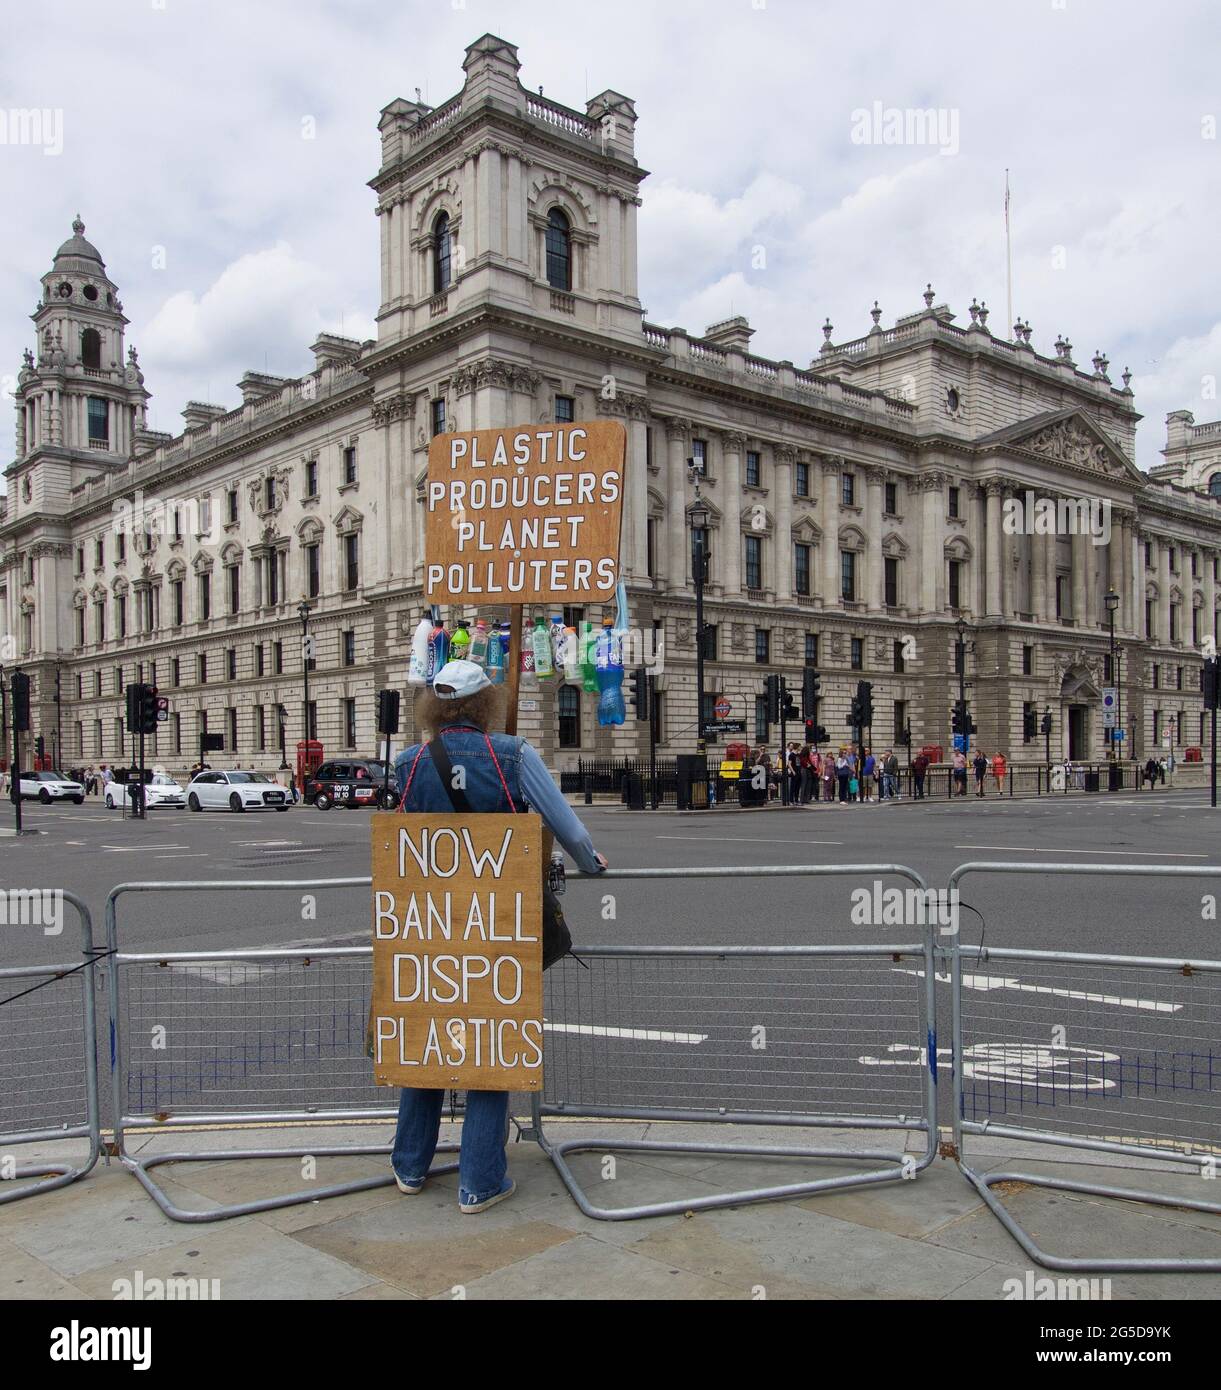 Demonstrations at Westminster, London, activism against pollution and use of single use plastics Stock Photo